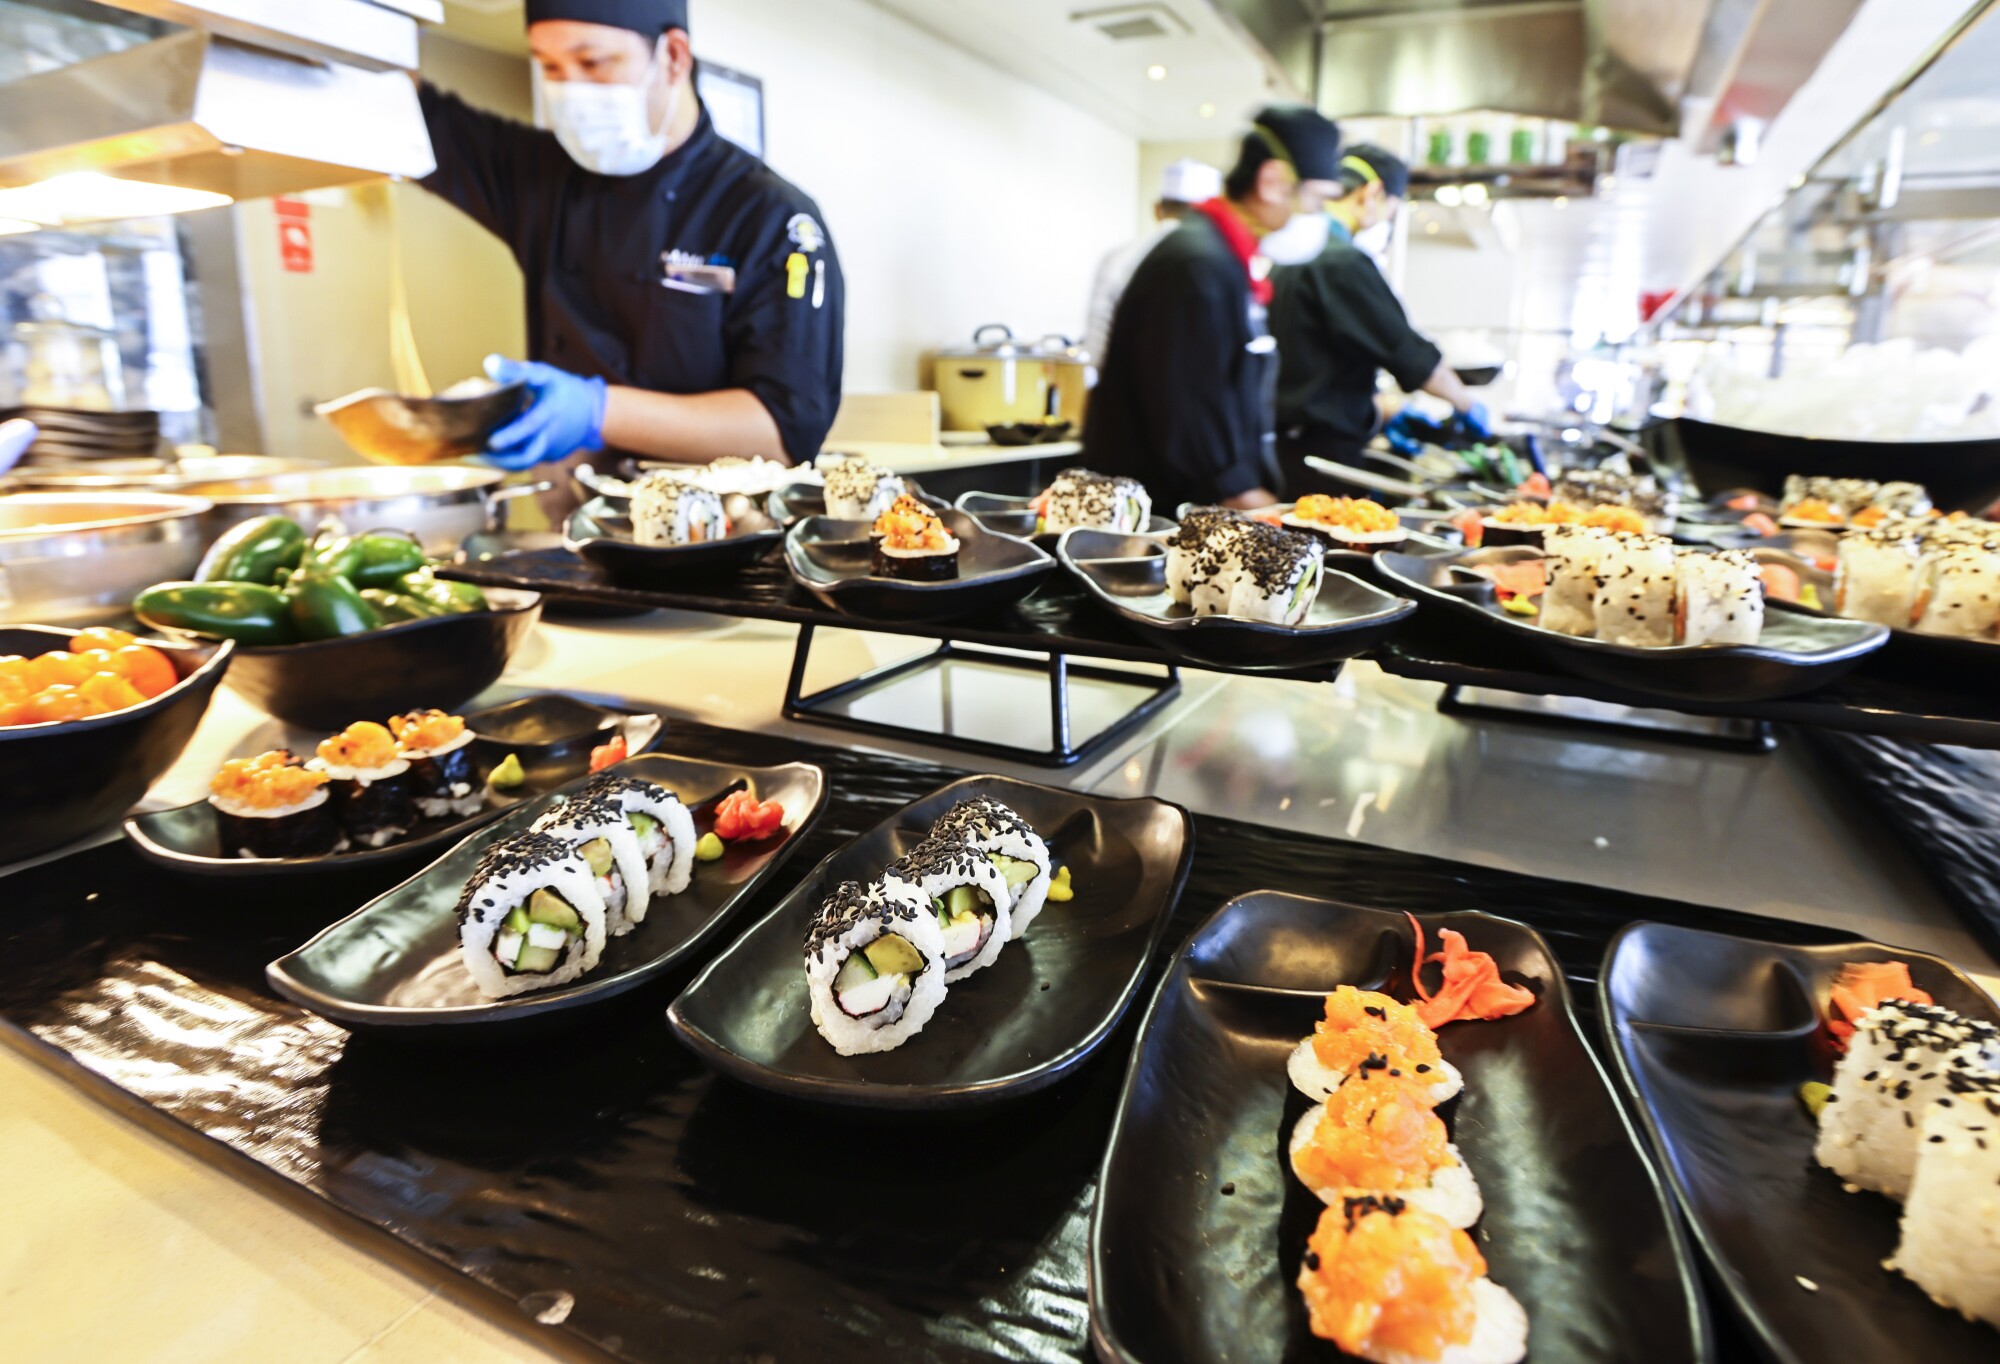 Crew members serve lunch for staff at a sushi bar on the Lido Deck of the Holland America Line cruise ship Koningsdam.